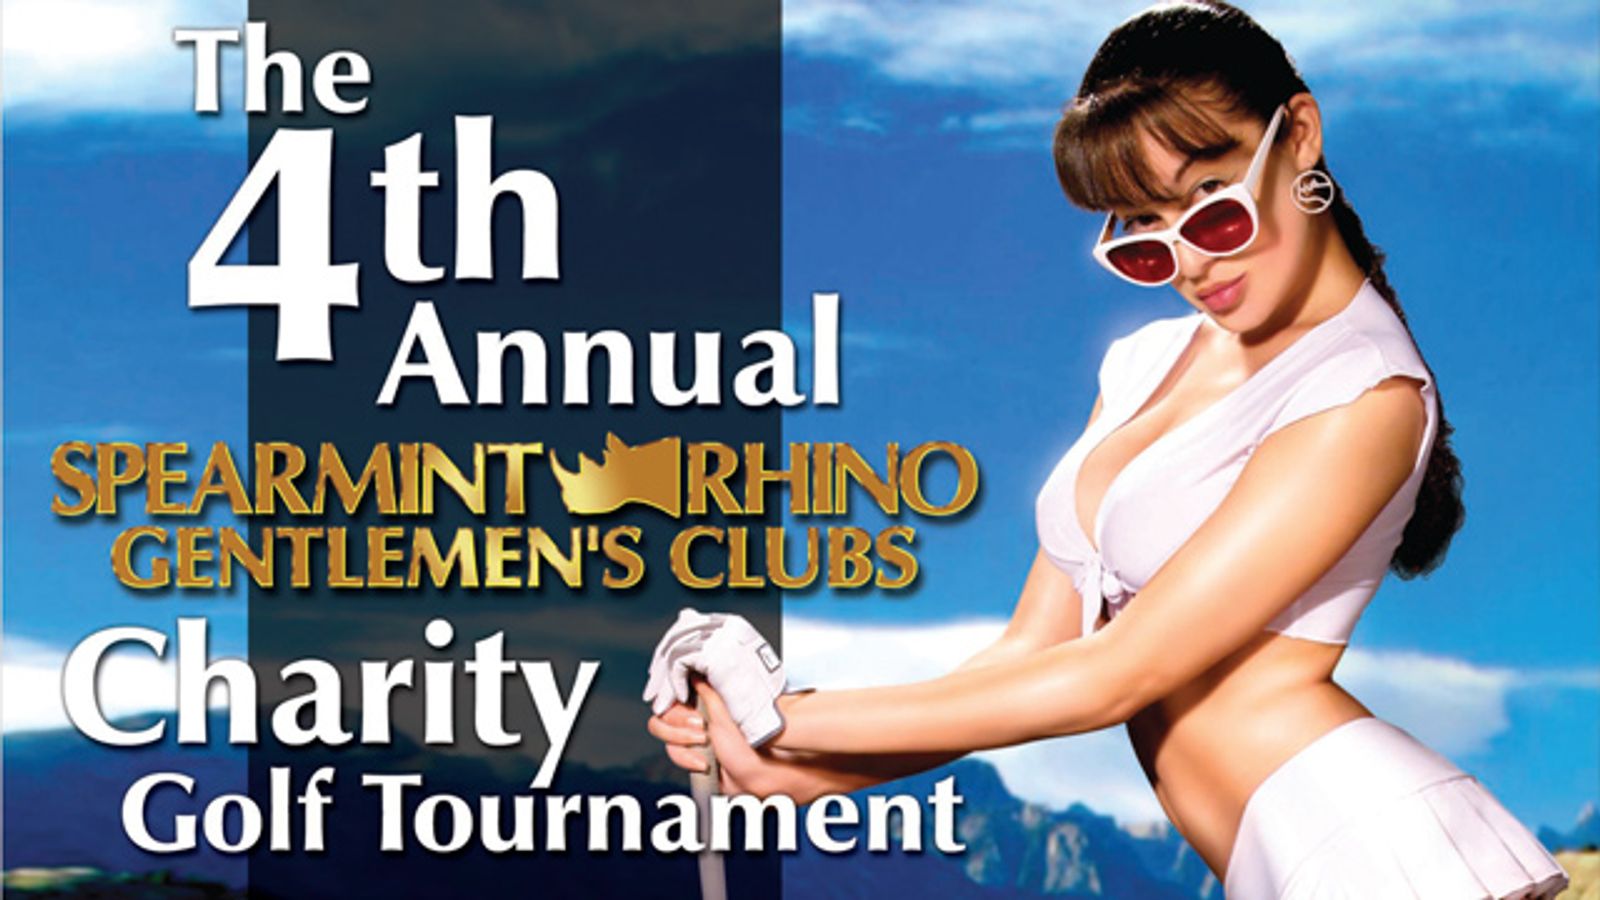 Spearmint Rhino Gears Up for Charity Golf Tournament